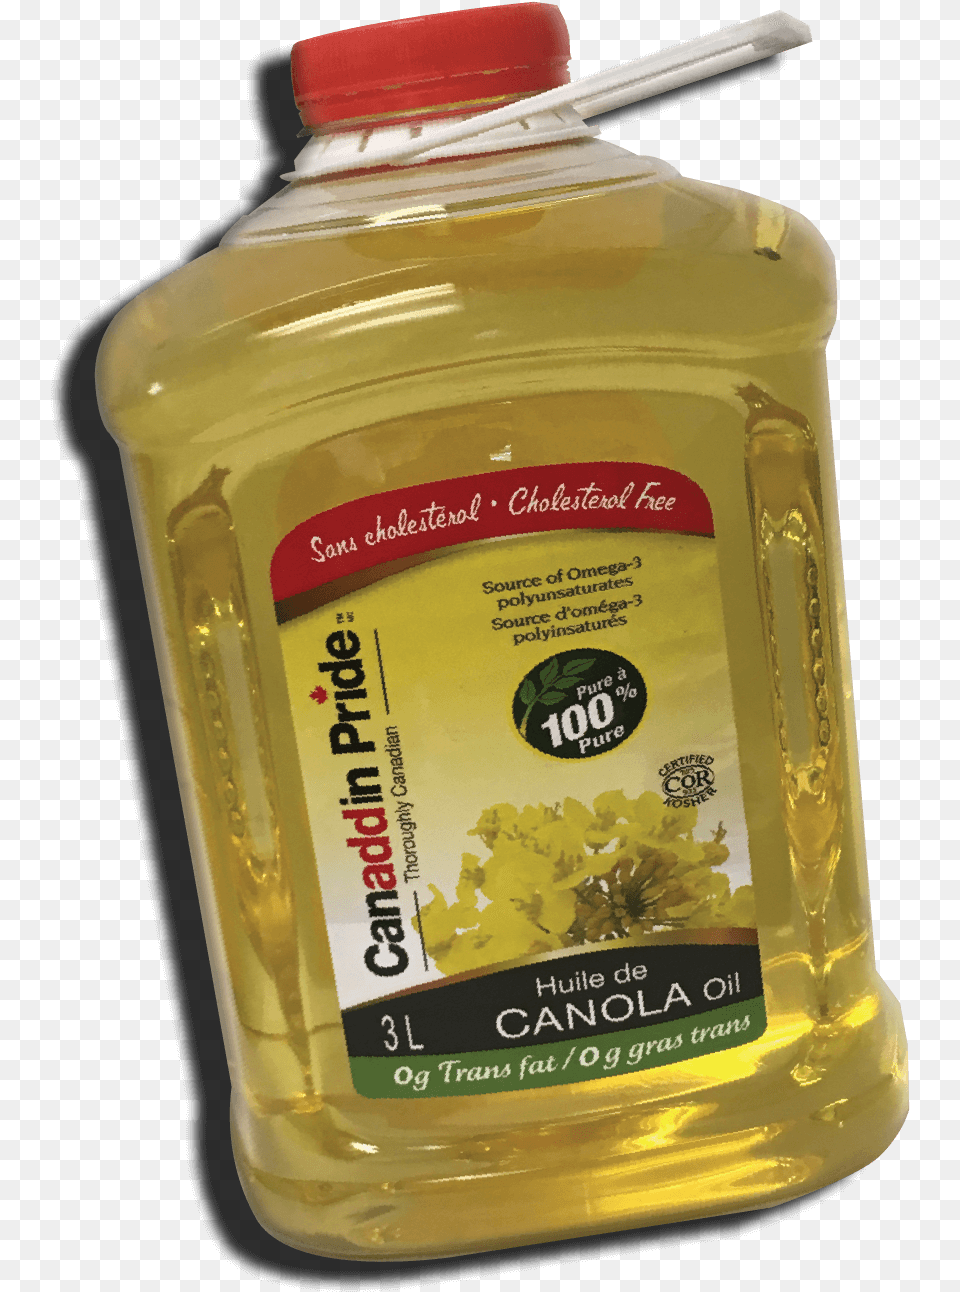 Canola Oil Bottle Bottle, Cooking Oil, Food, Cosmetics, Perfume Free Transparent Png